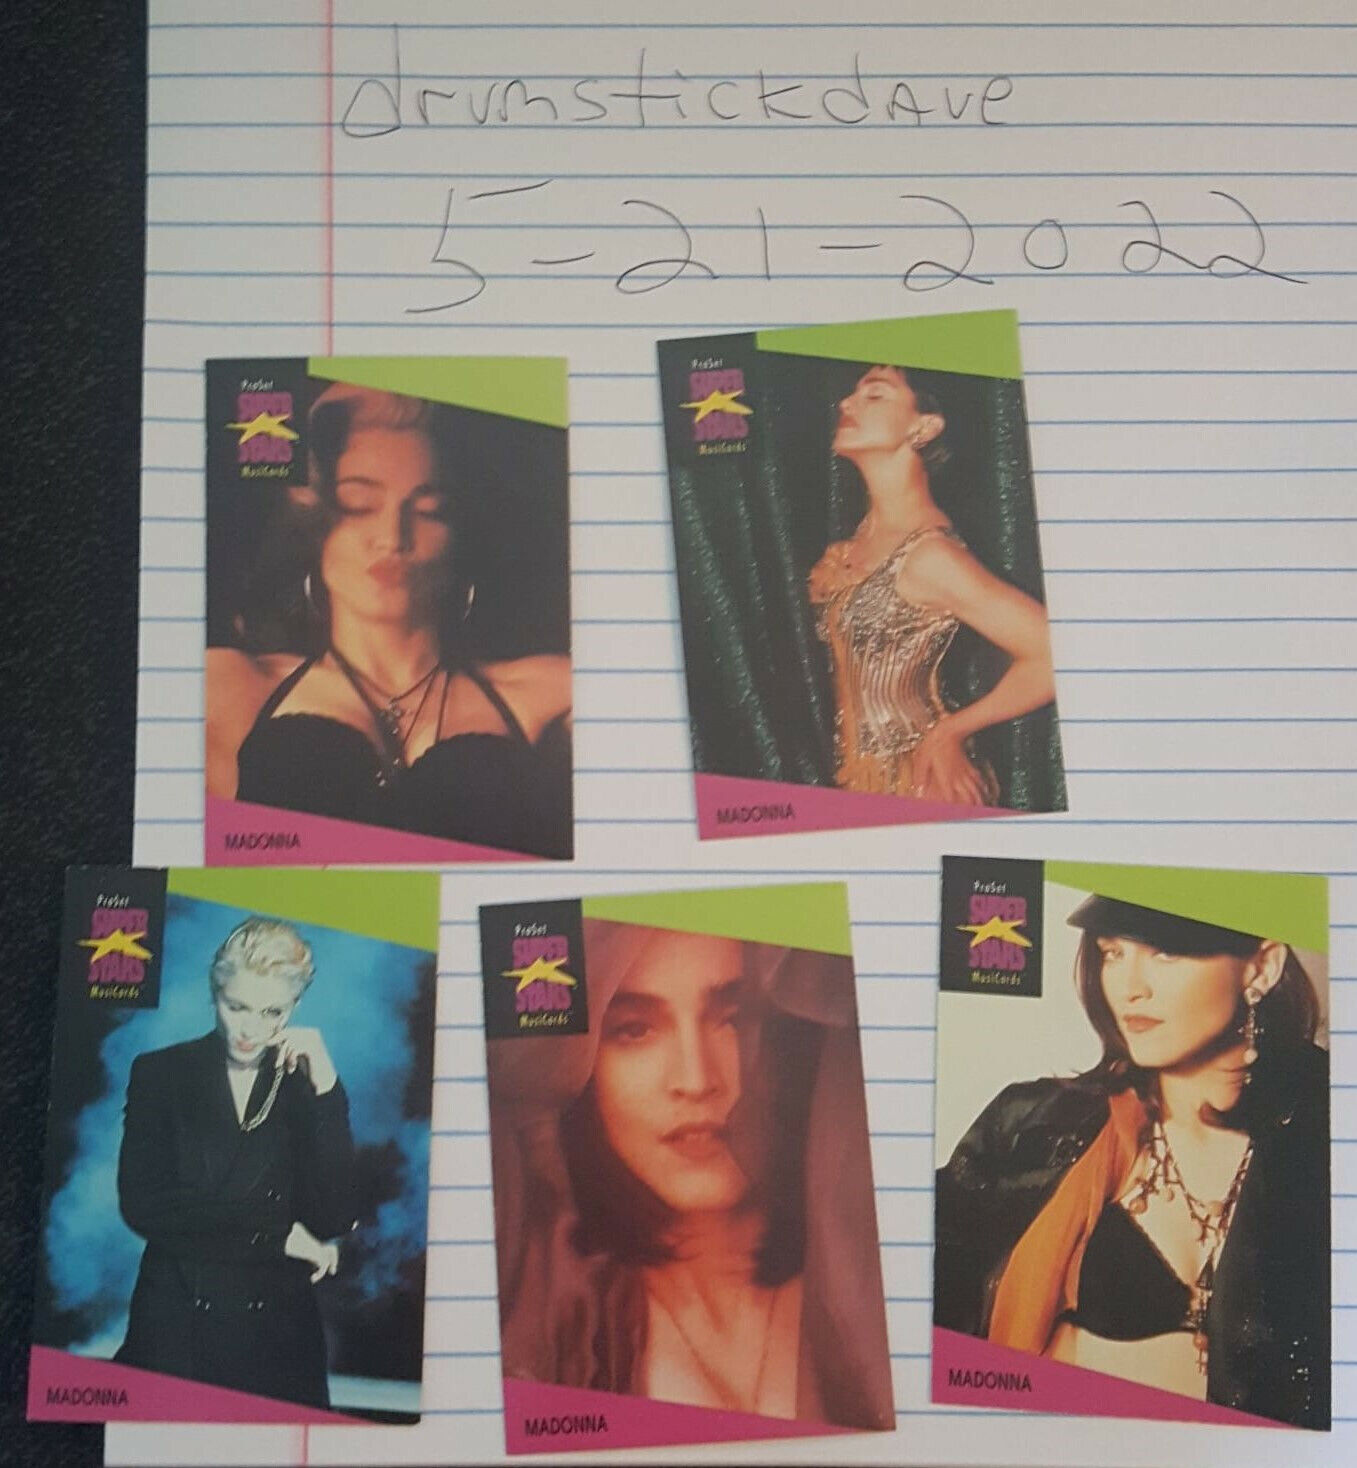 MADONNA. 1991 complete trading card set (5 cards) mint condition